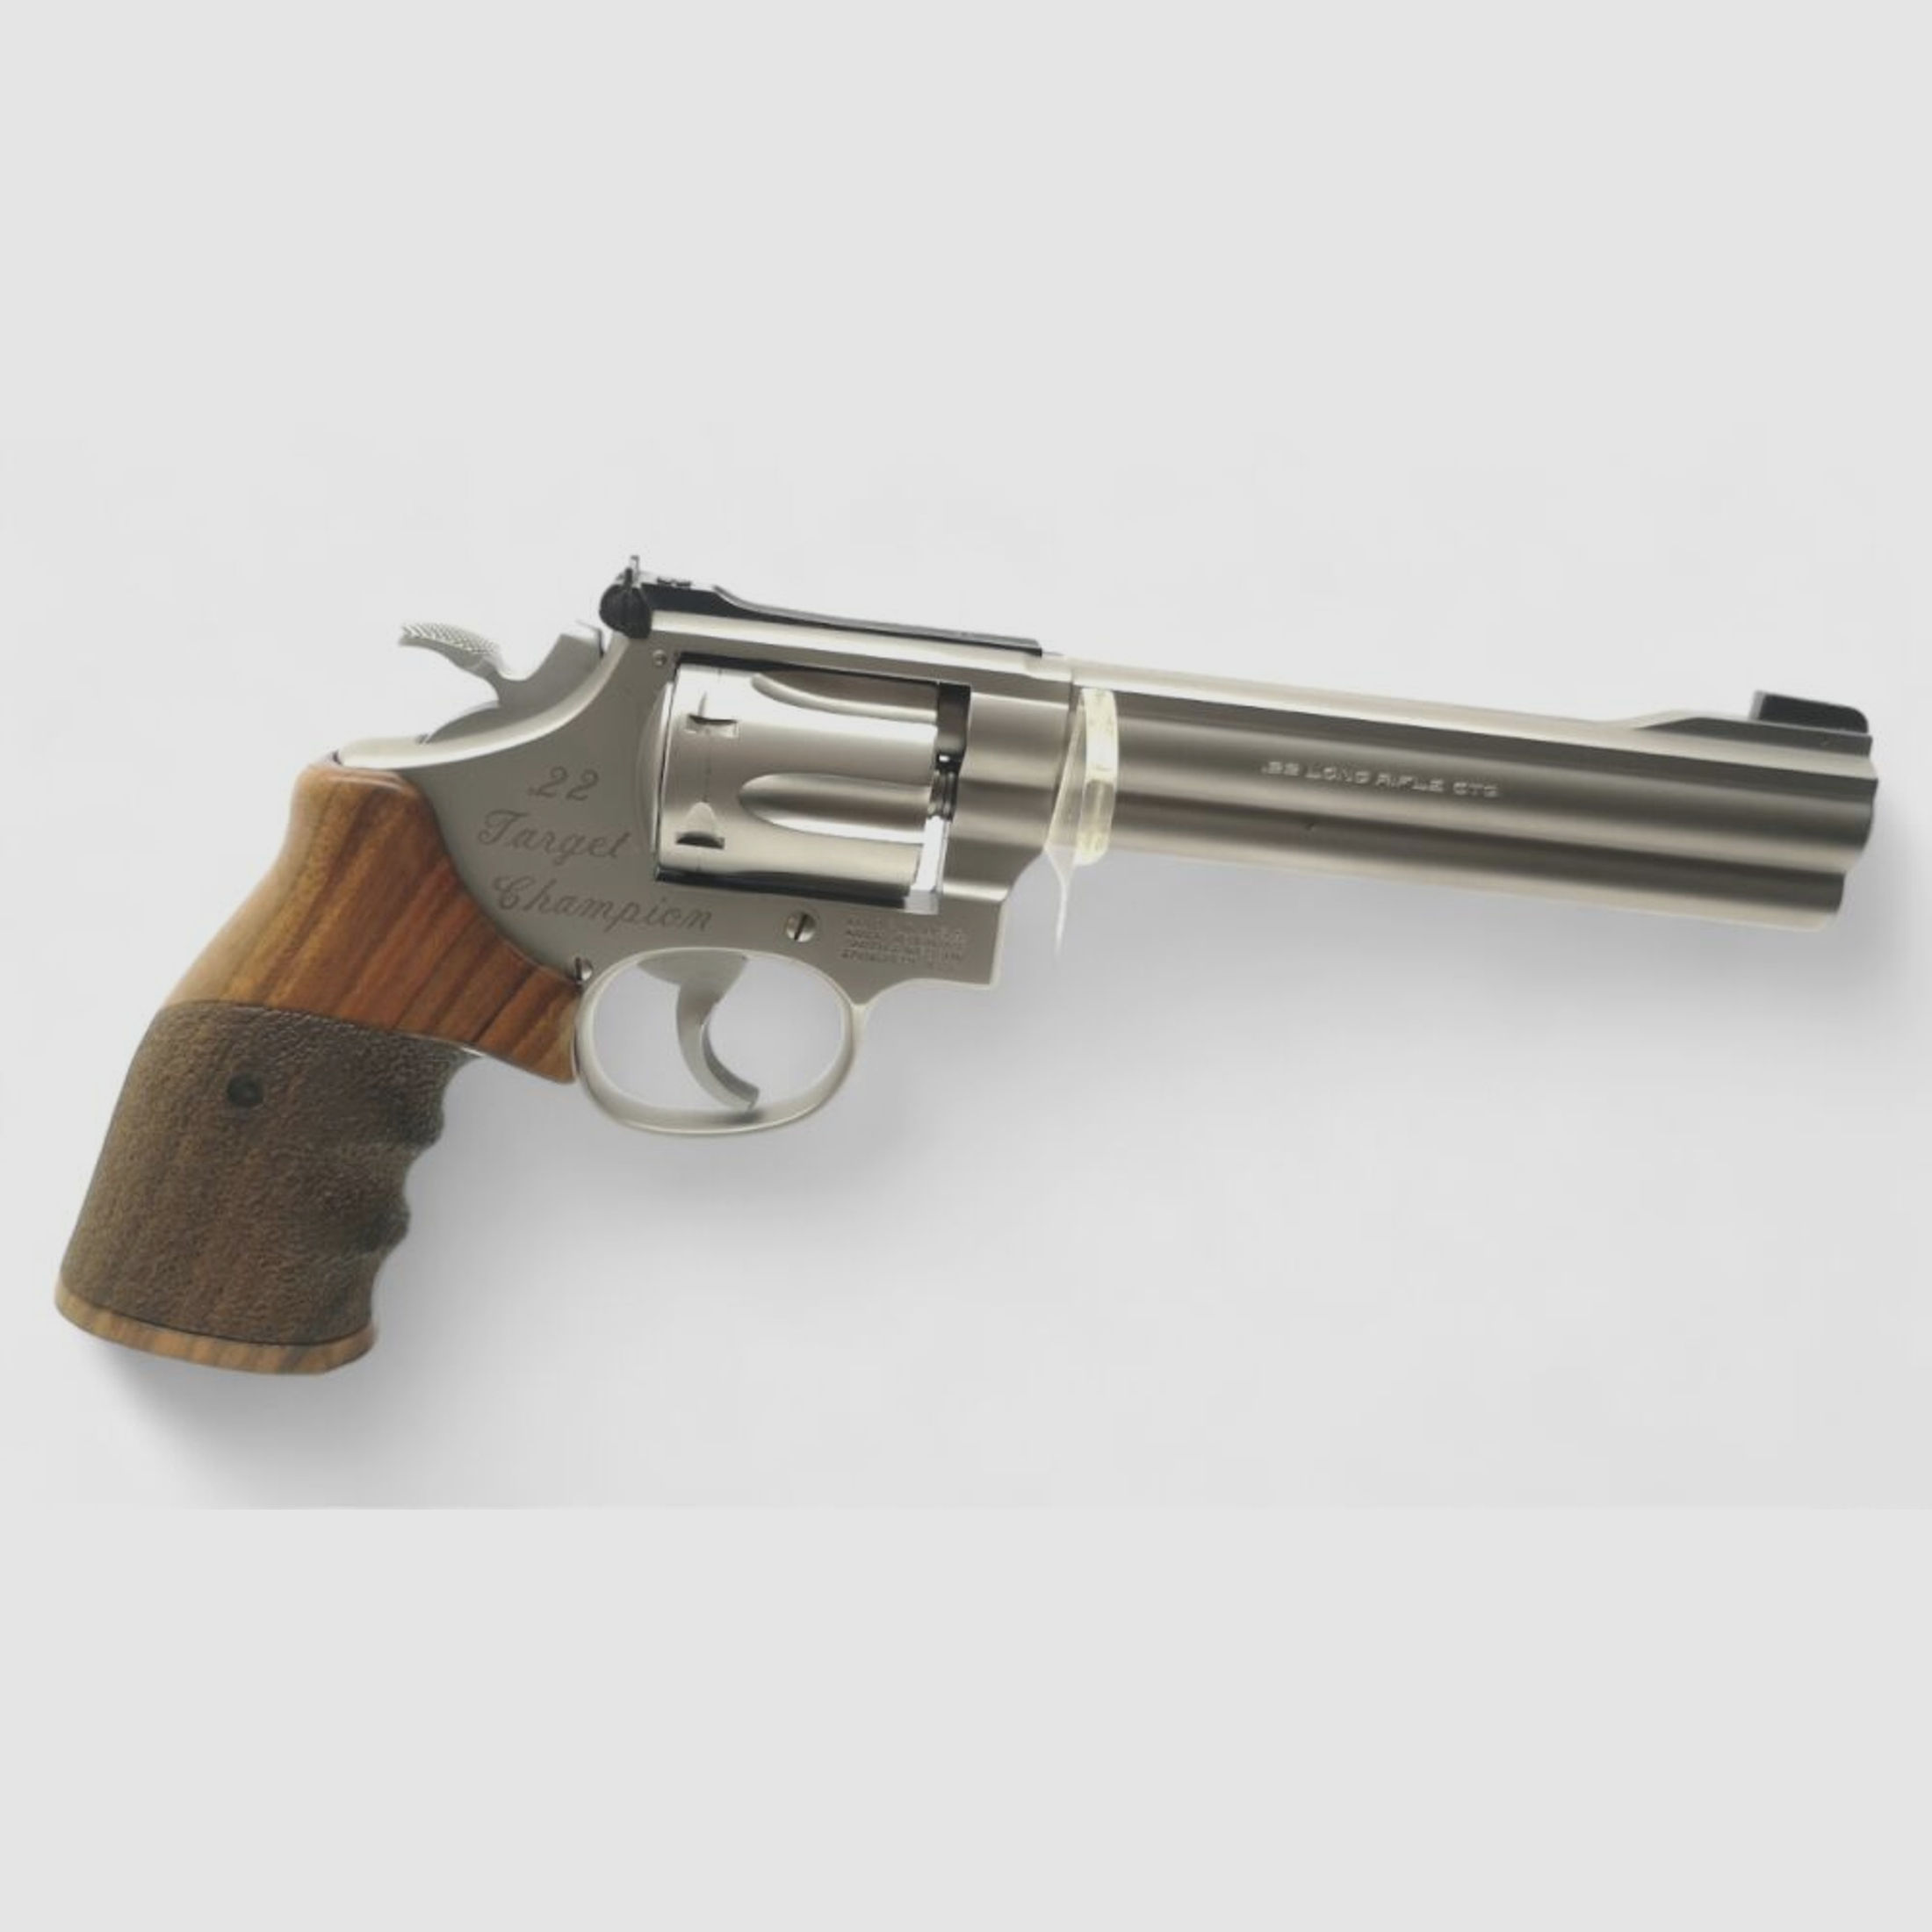 Smith & Wesson	 617 Target Champion